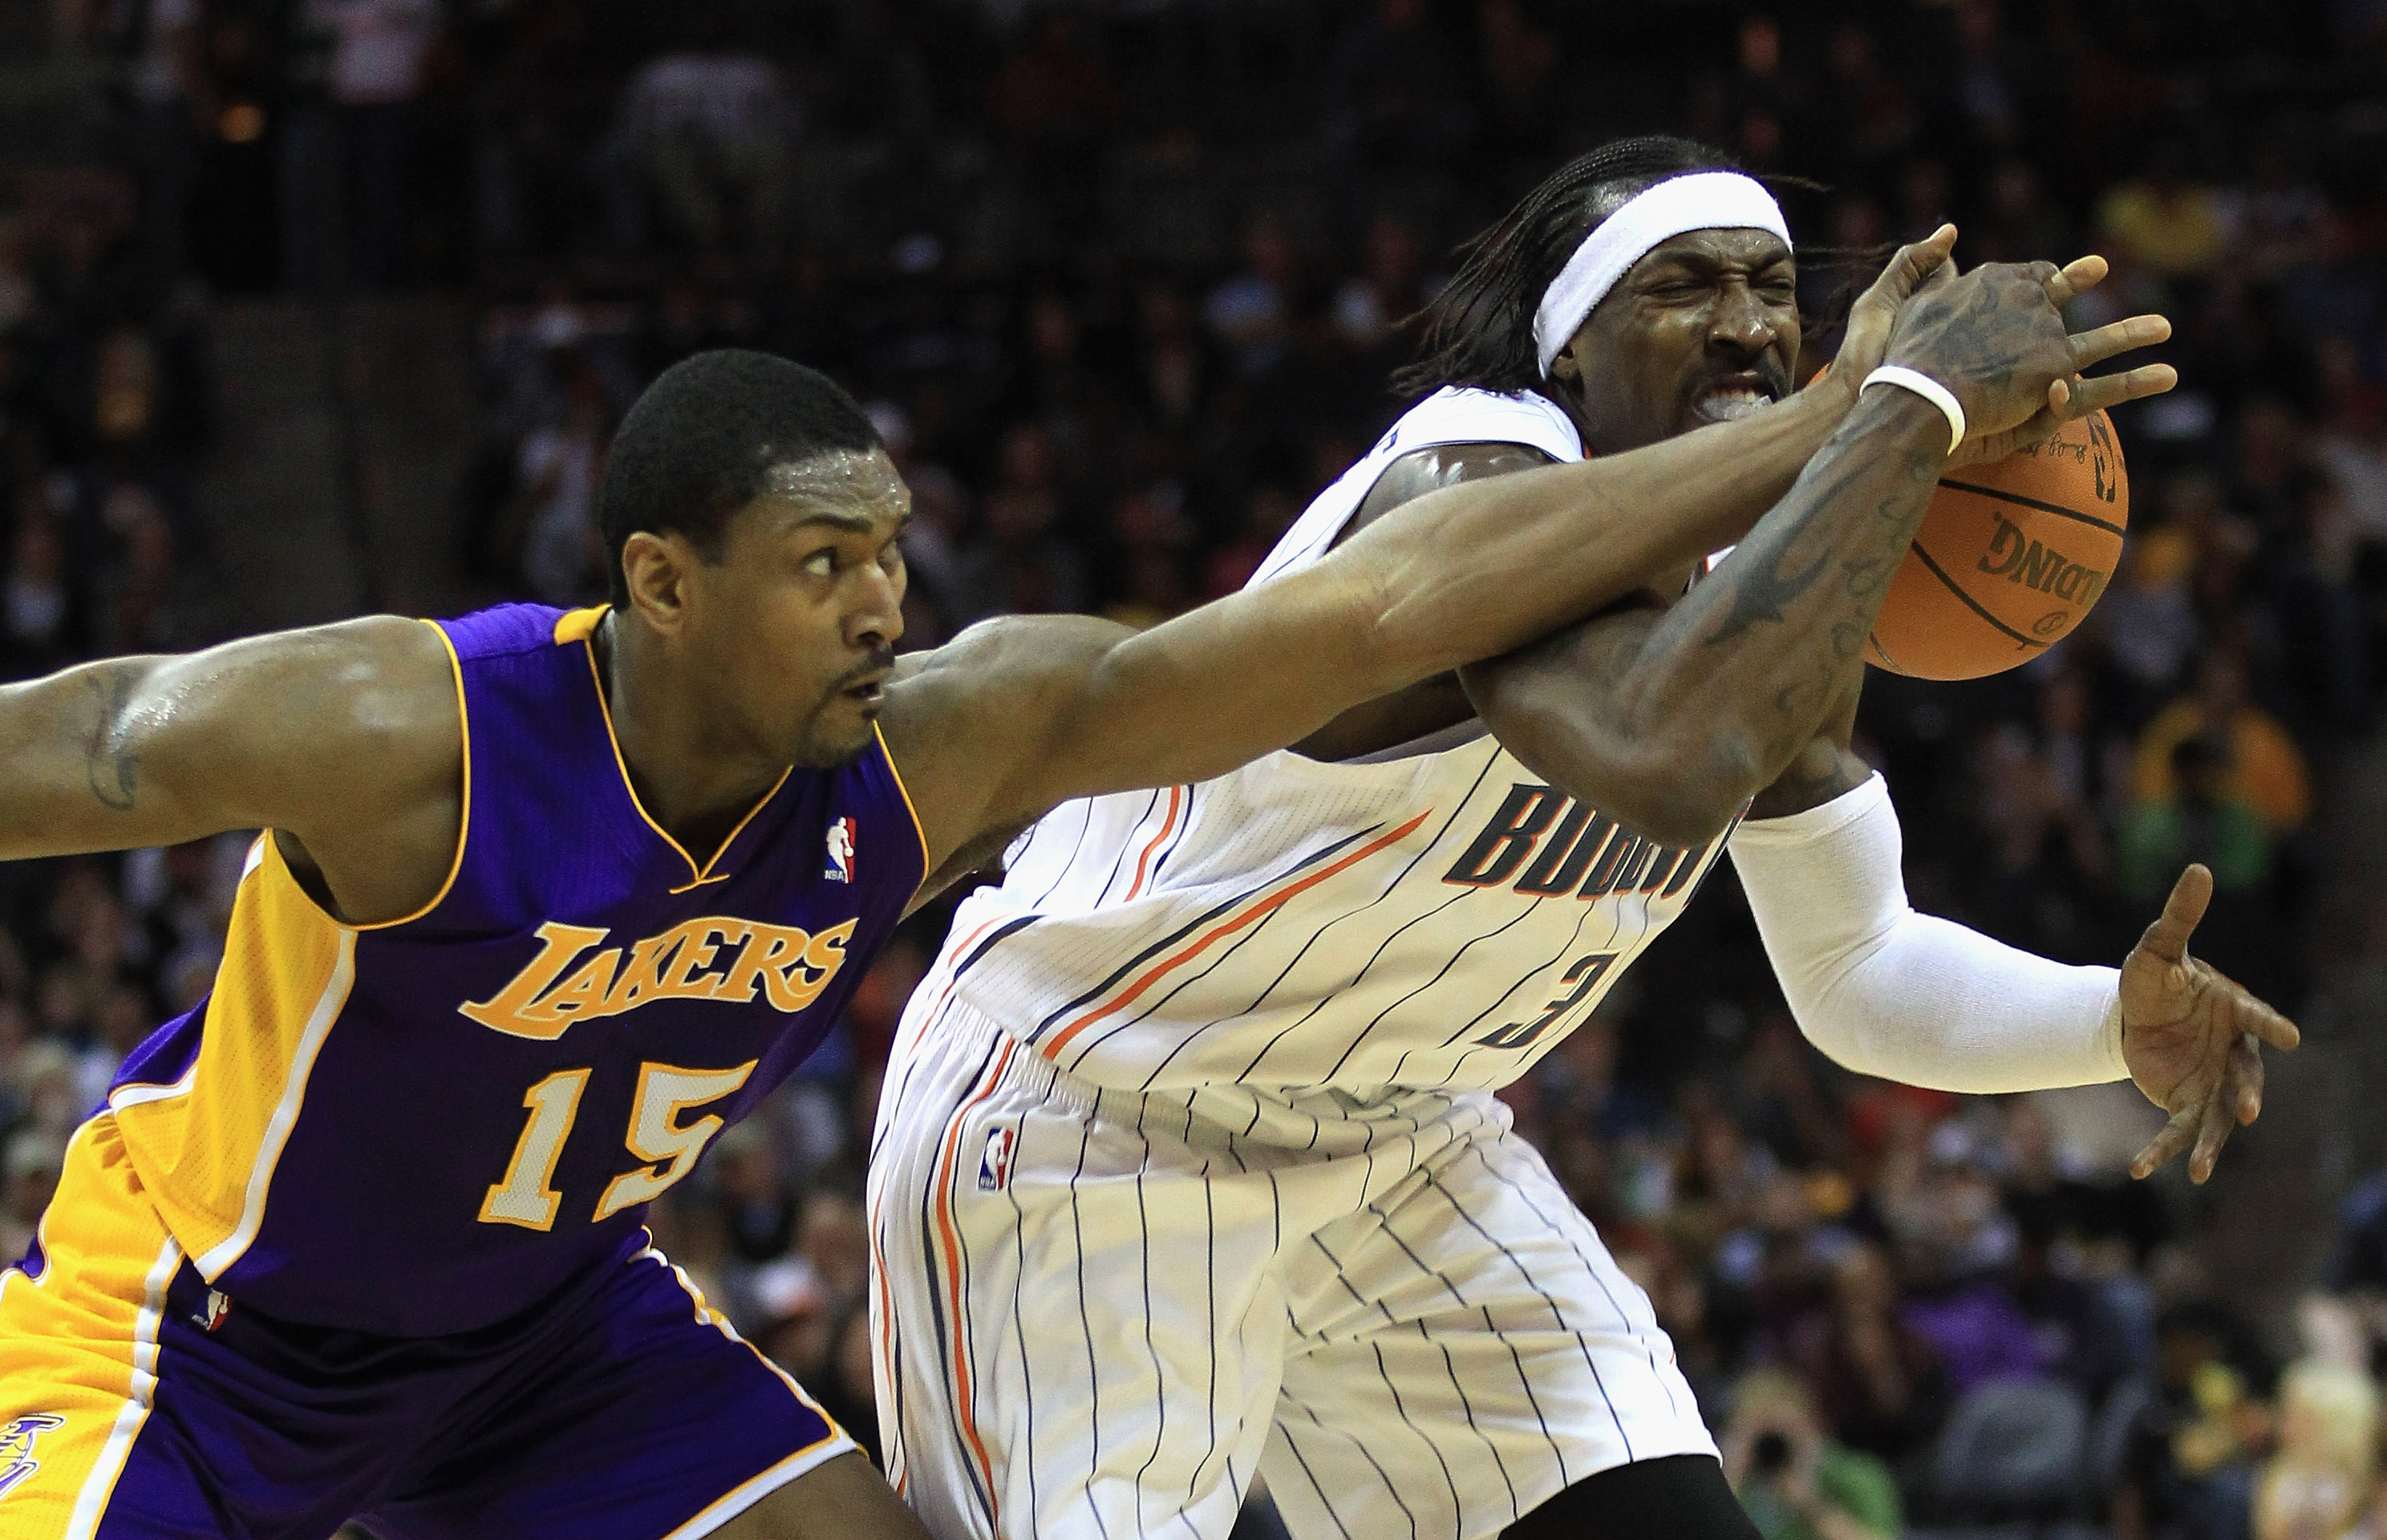 CHARLOTTE, NC - FEBRUARY 14:  Ron Artest #15 of the Los Angeles Lakers knocks the ball loose from Gerald Wallace #3 of the Charlotte Bobcats during their game at Time Warner Cable Arena on February 14, 2011 in Charlotte, North Carolina. NOTE TO USER: User